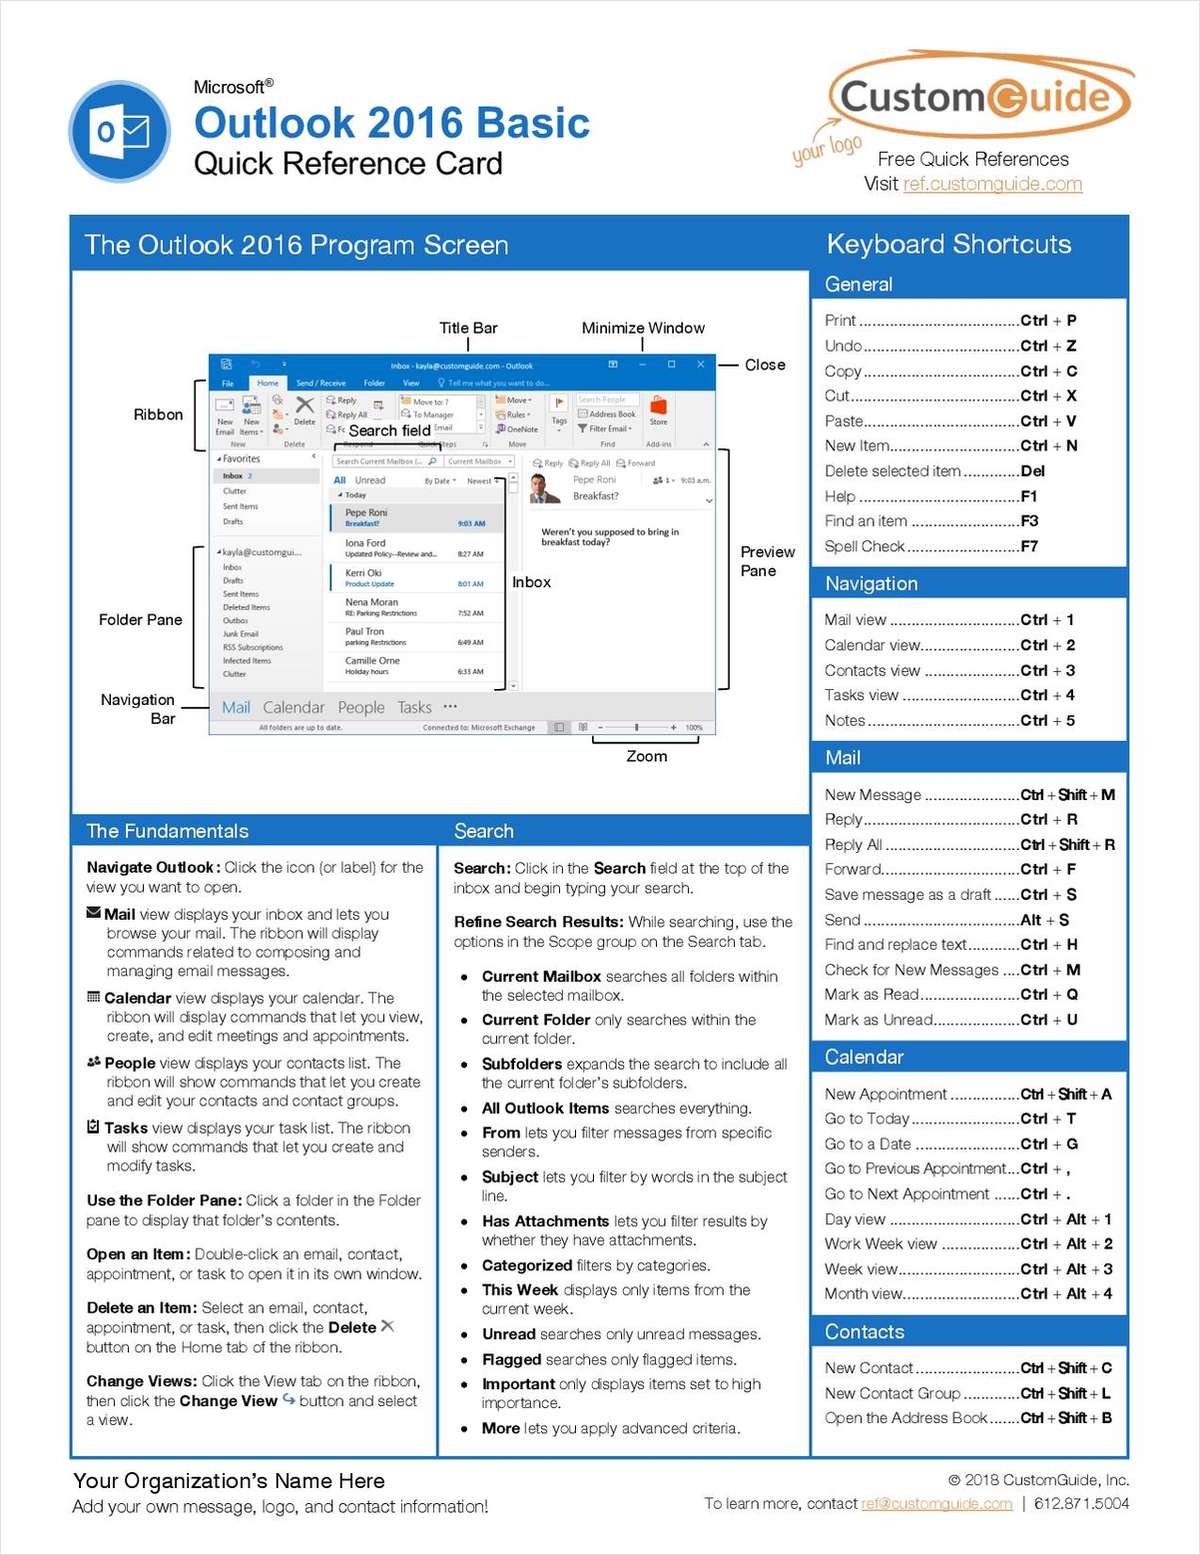 Microsoft Outlook 2016 Basic - Quick Reference Card